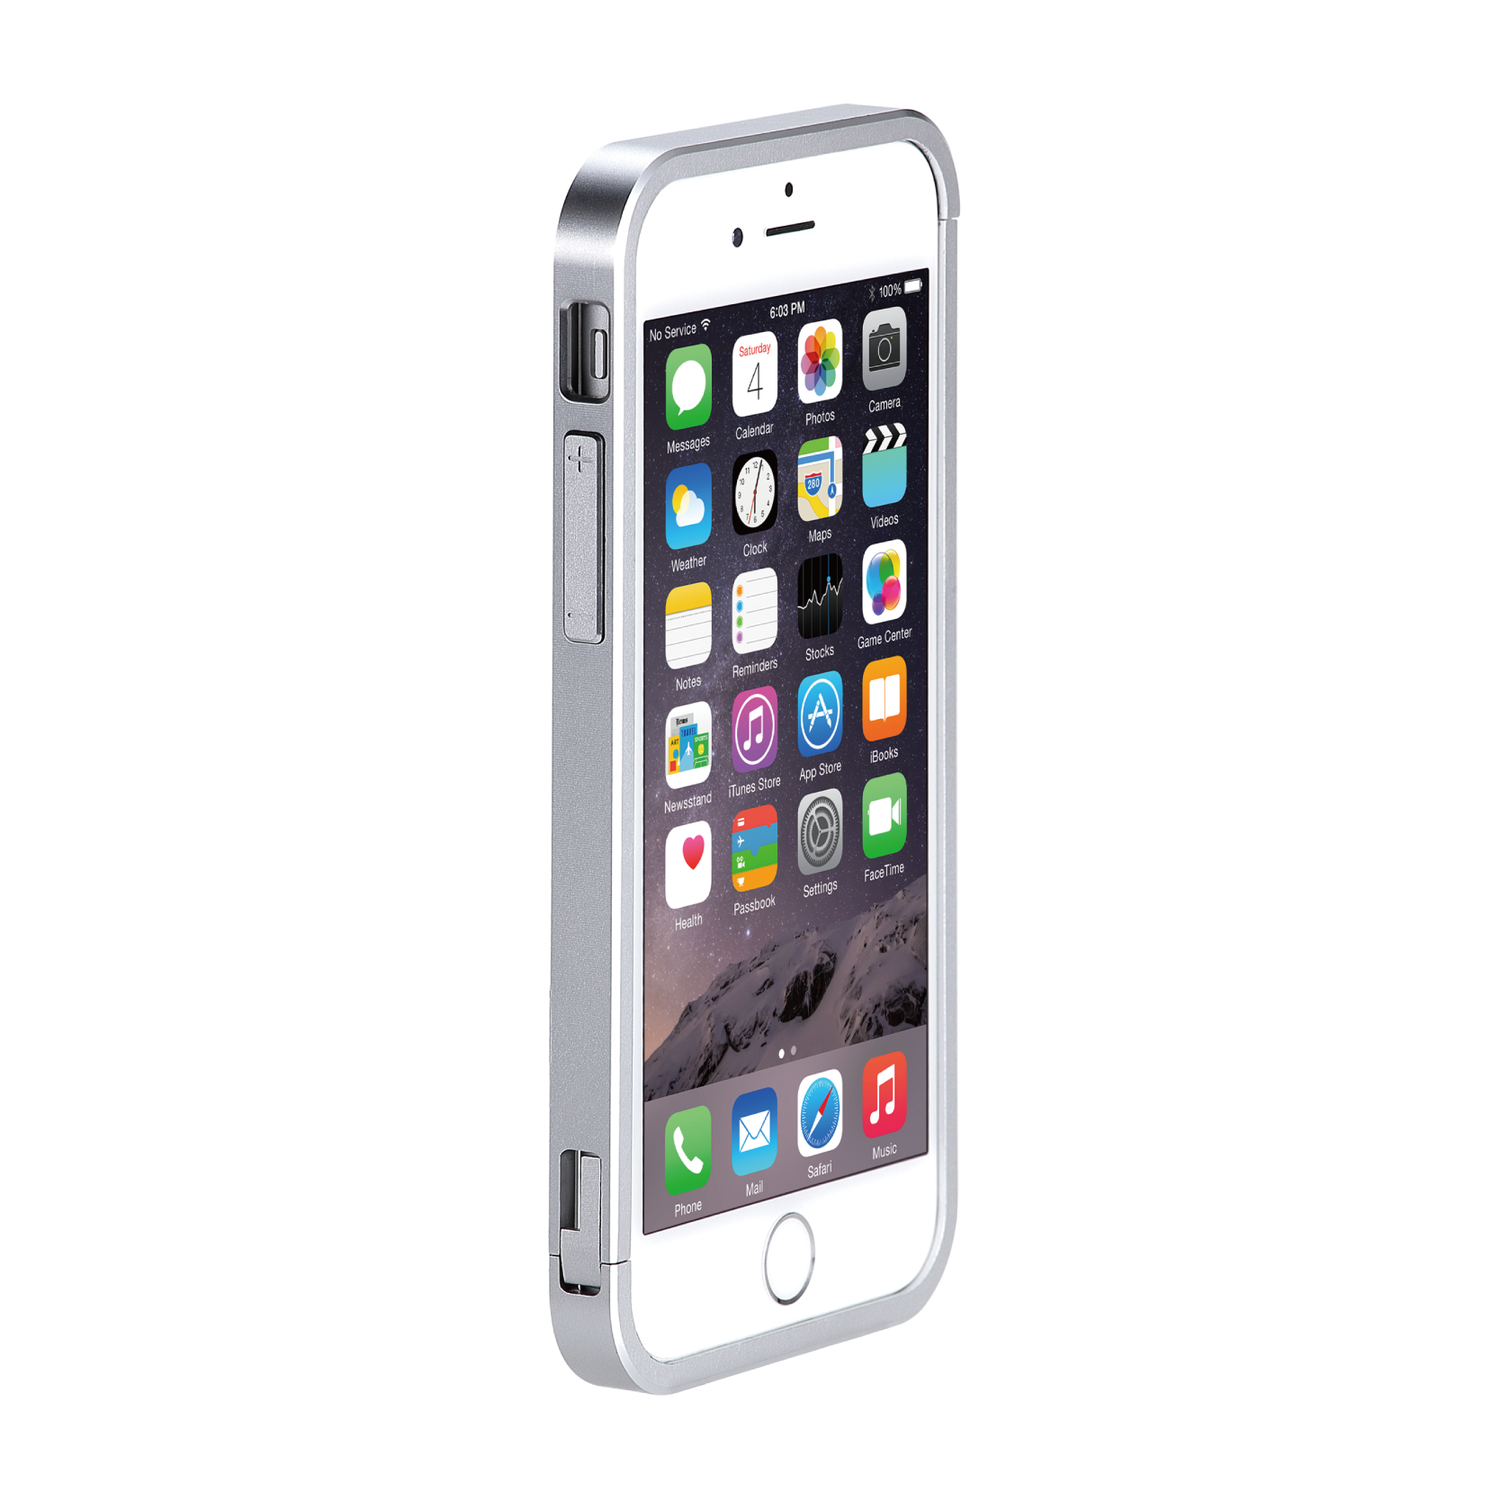 Just Mobile AluFrame Case for iPhone 6 Plus/6s Plus AF-269SI B&H